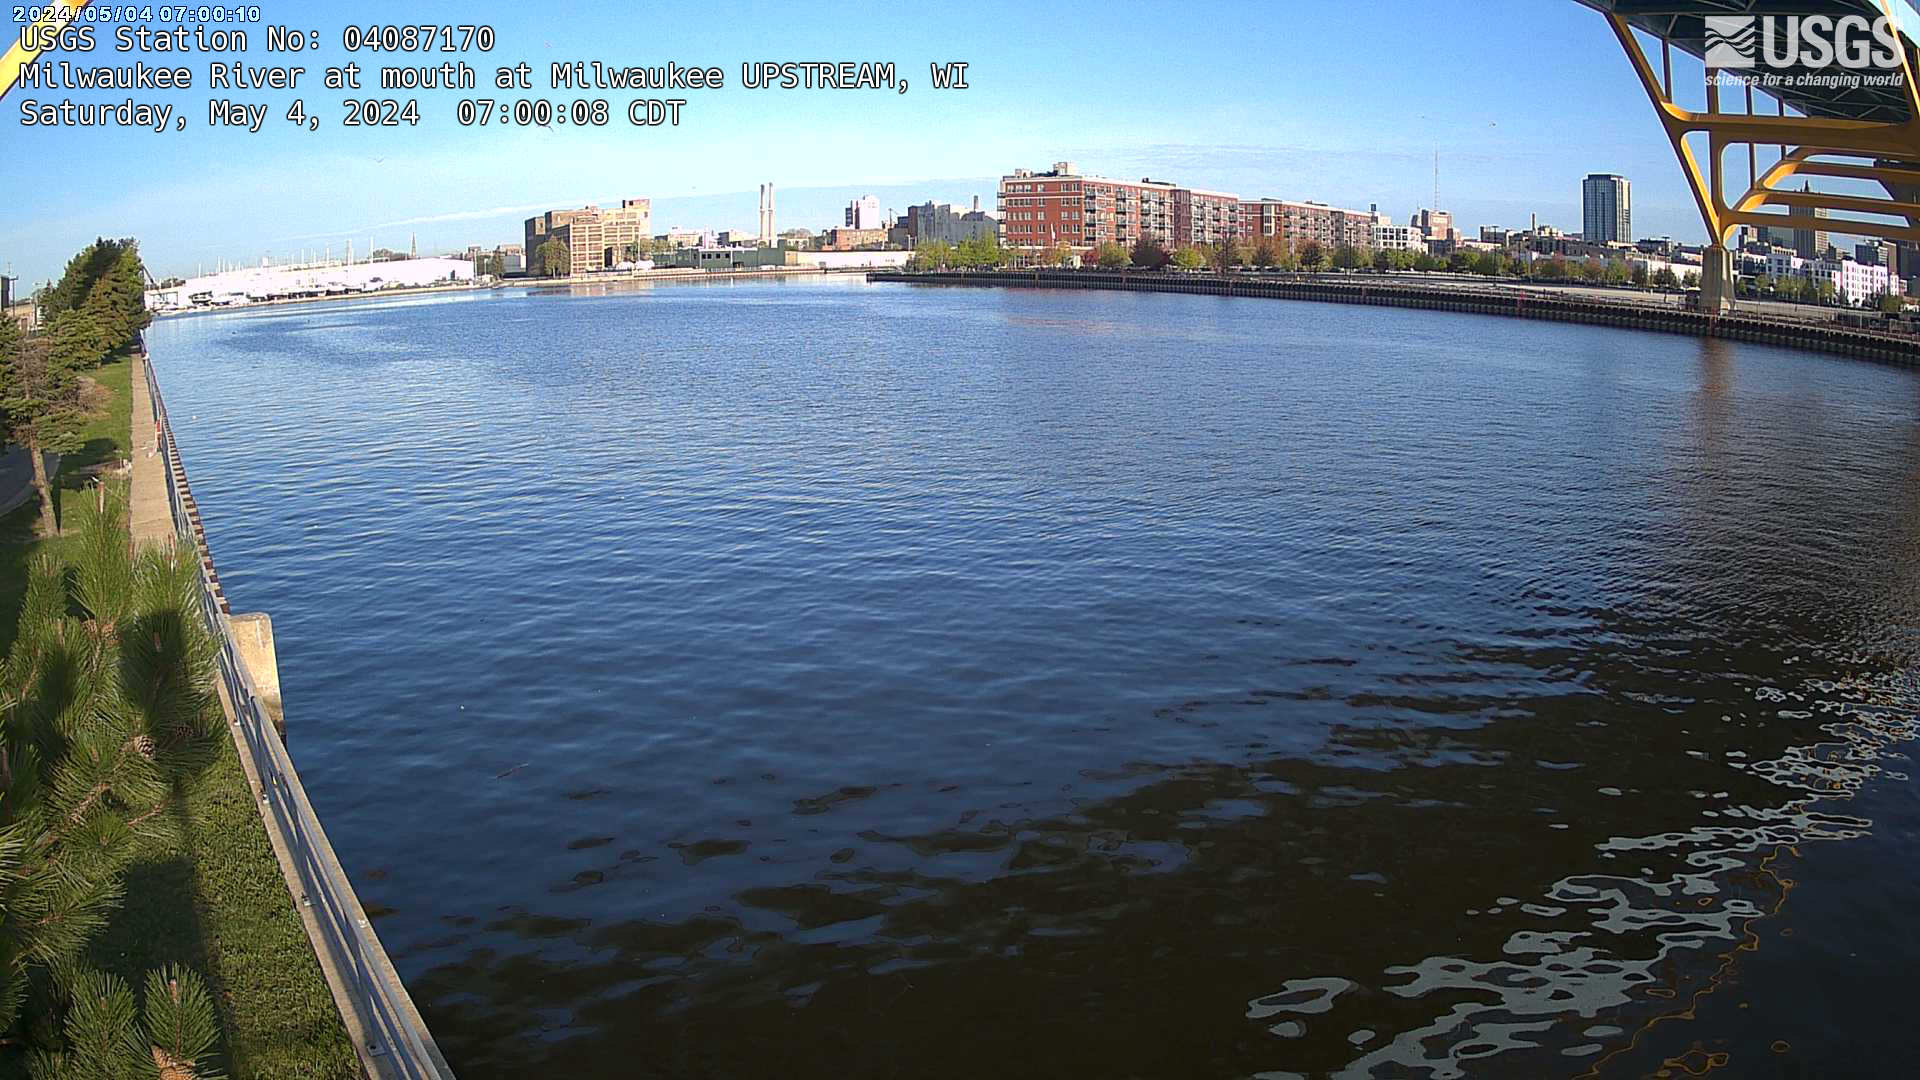 Webcam at streamgage at Milwaukee River at Mouth at Milwaukee, Wisconsin